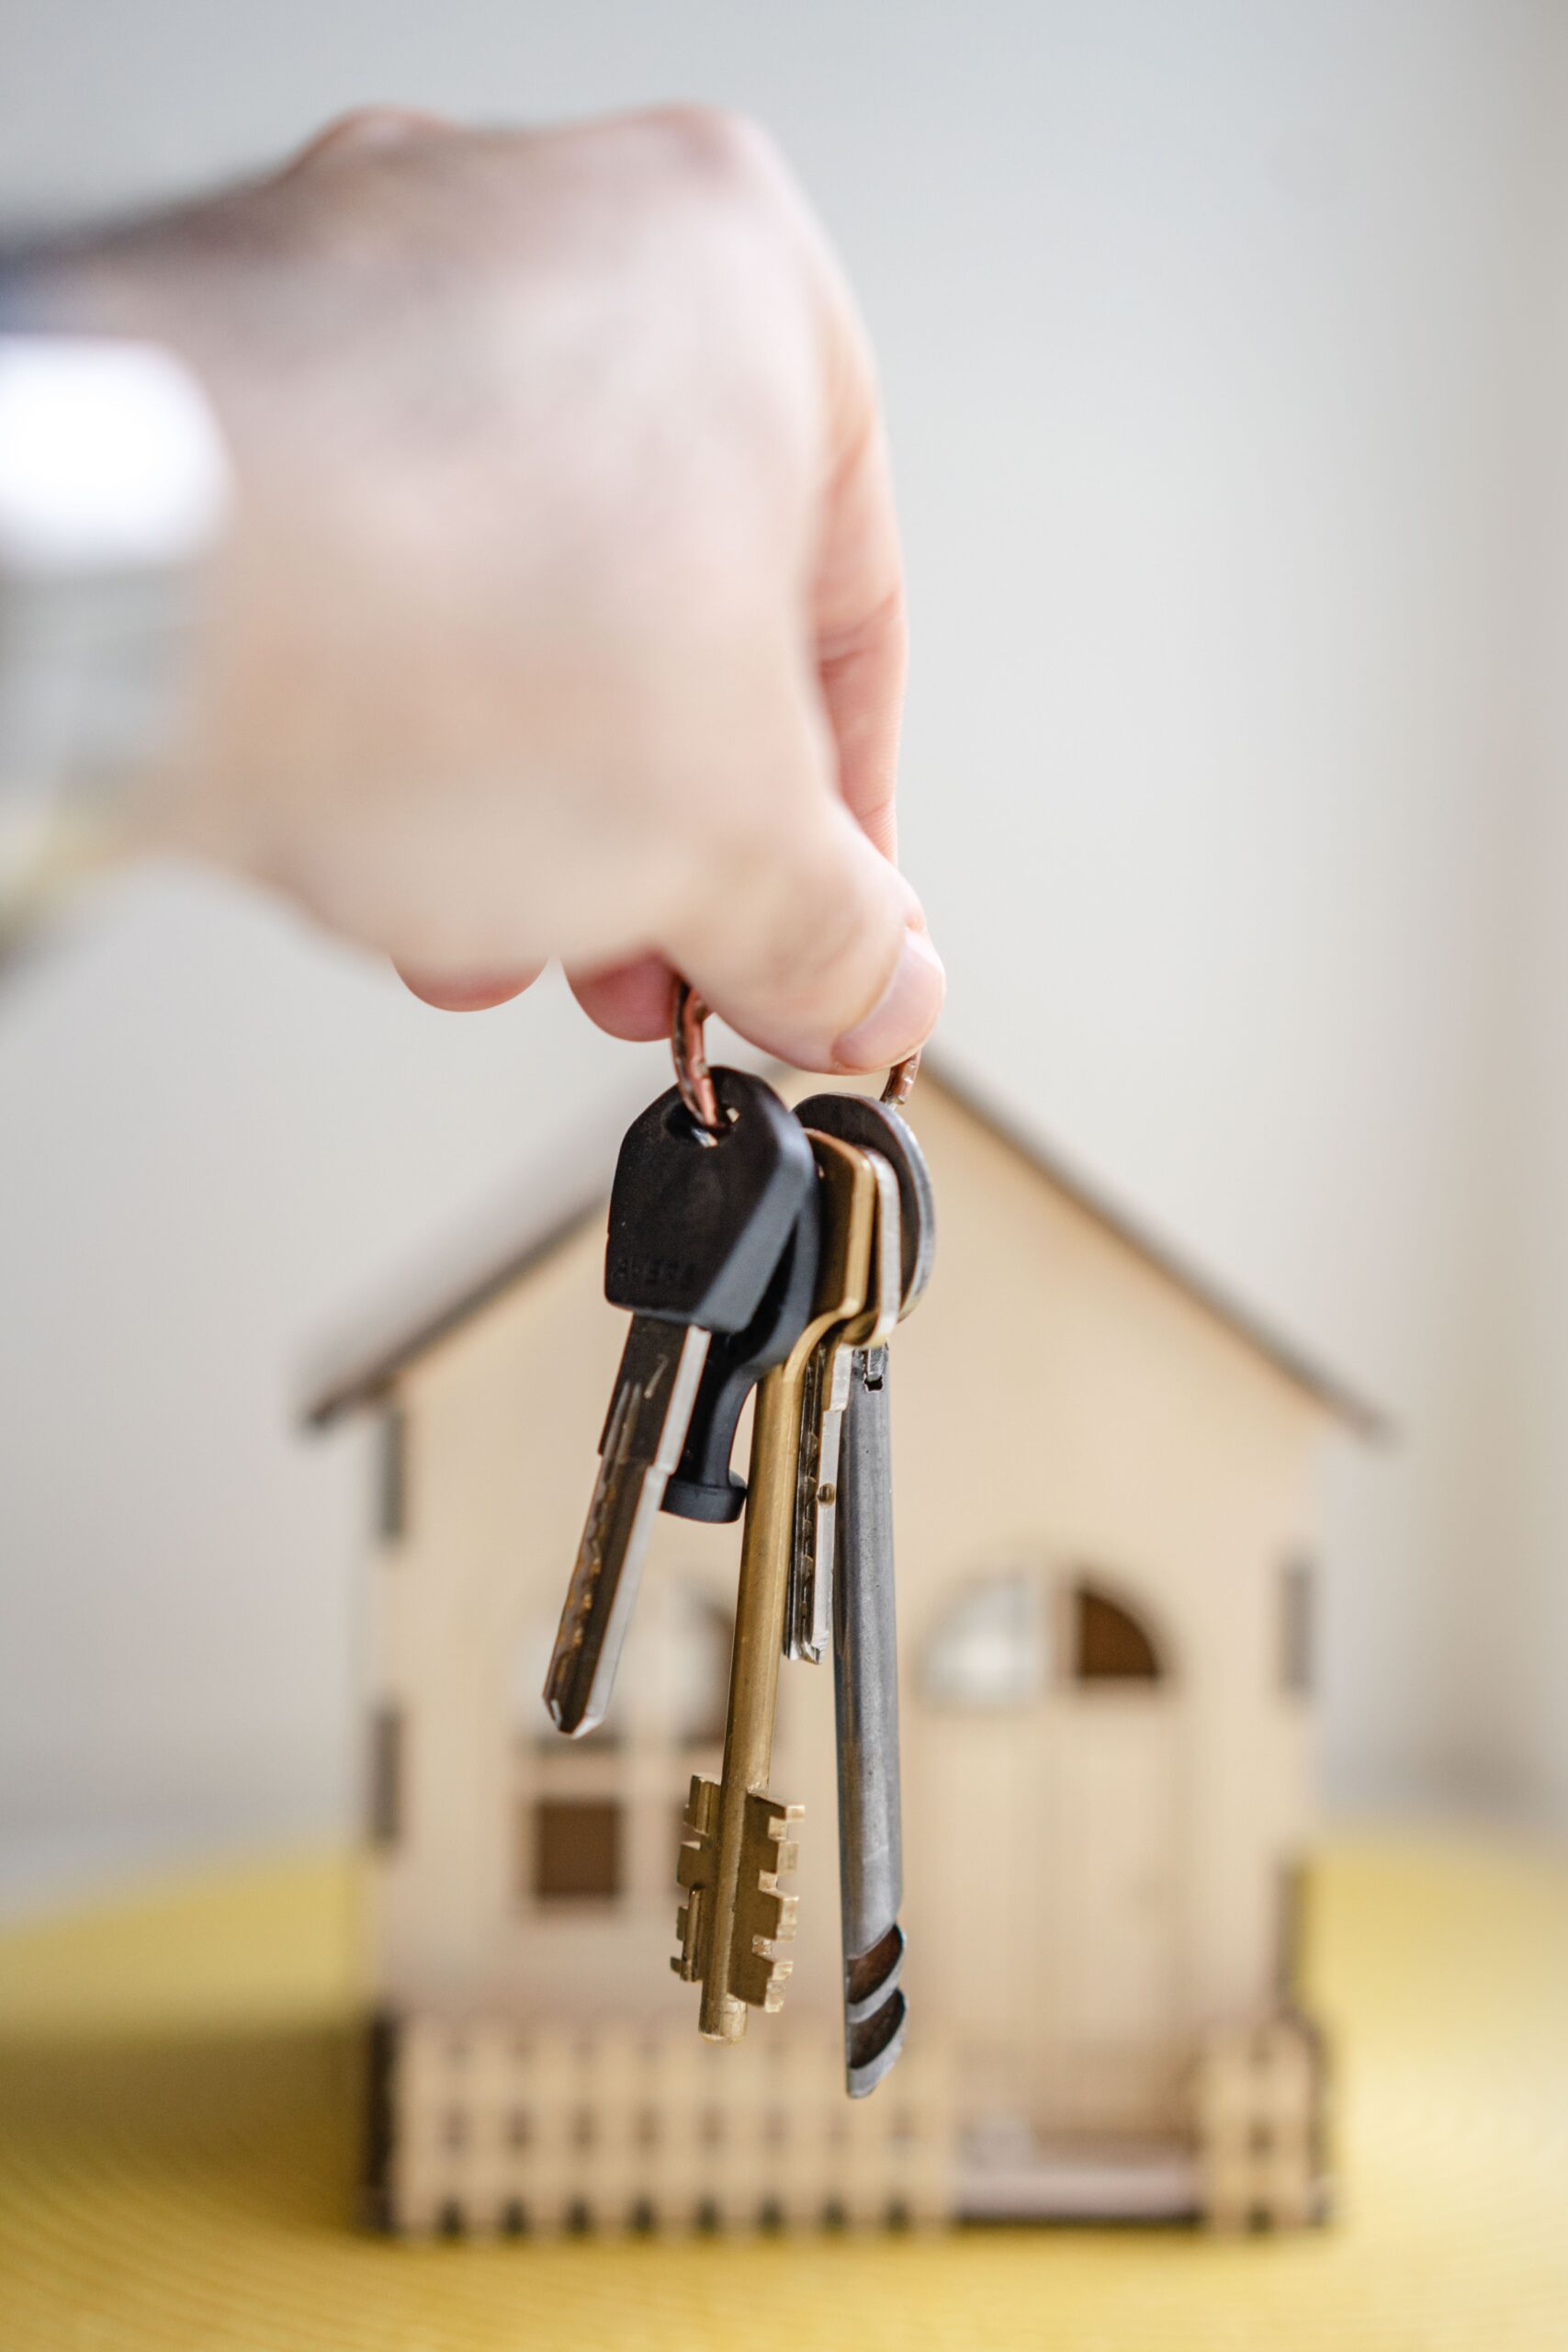 A hand holding keys in front of a model house representing selling a home.